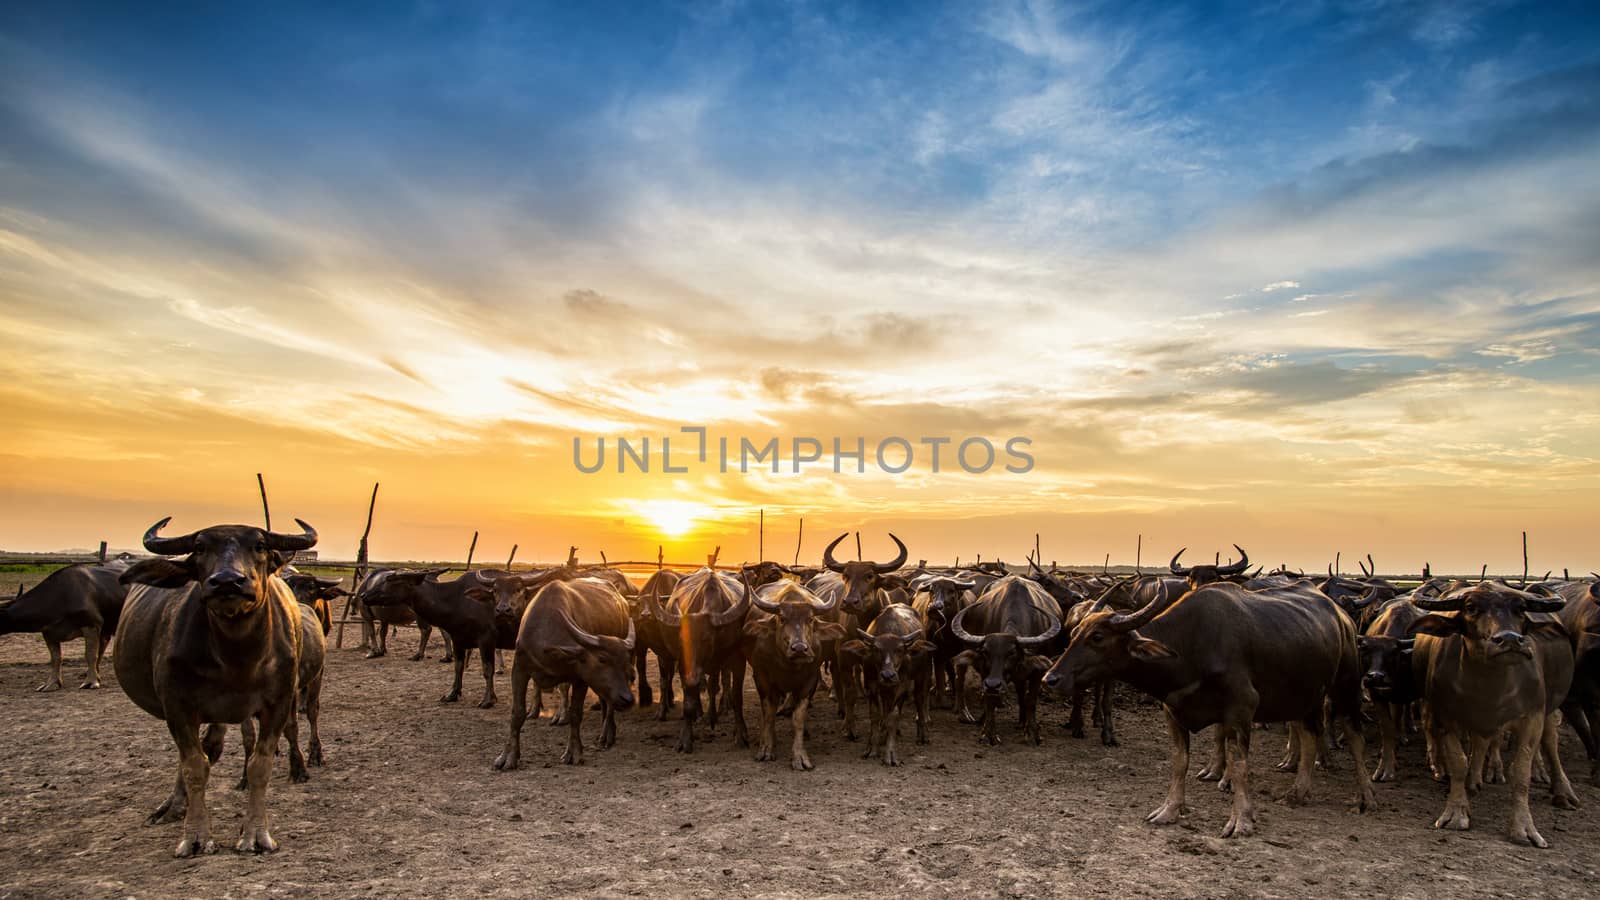 Buffalo in Thailand at sunset with orange blue cloudy sky. by chanwity